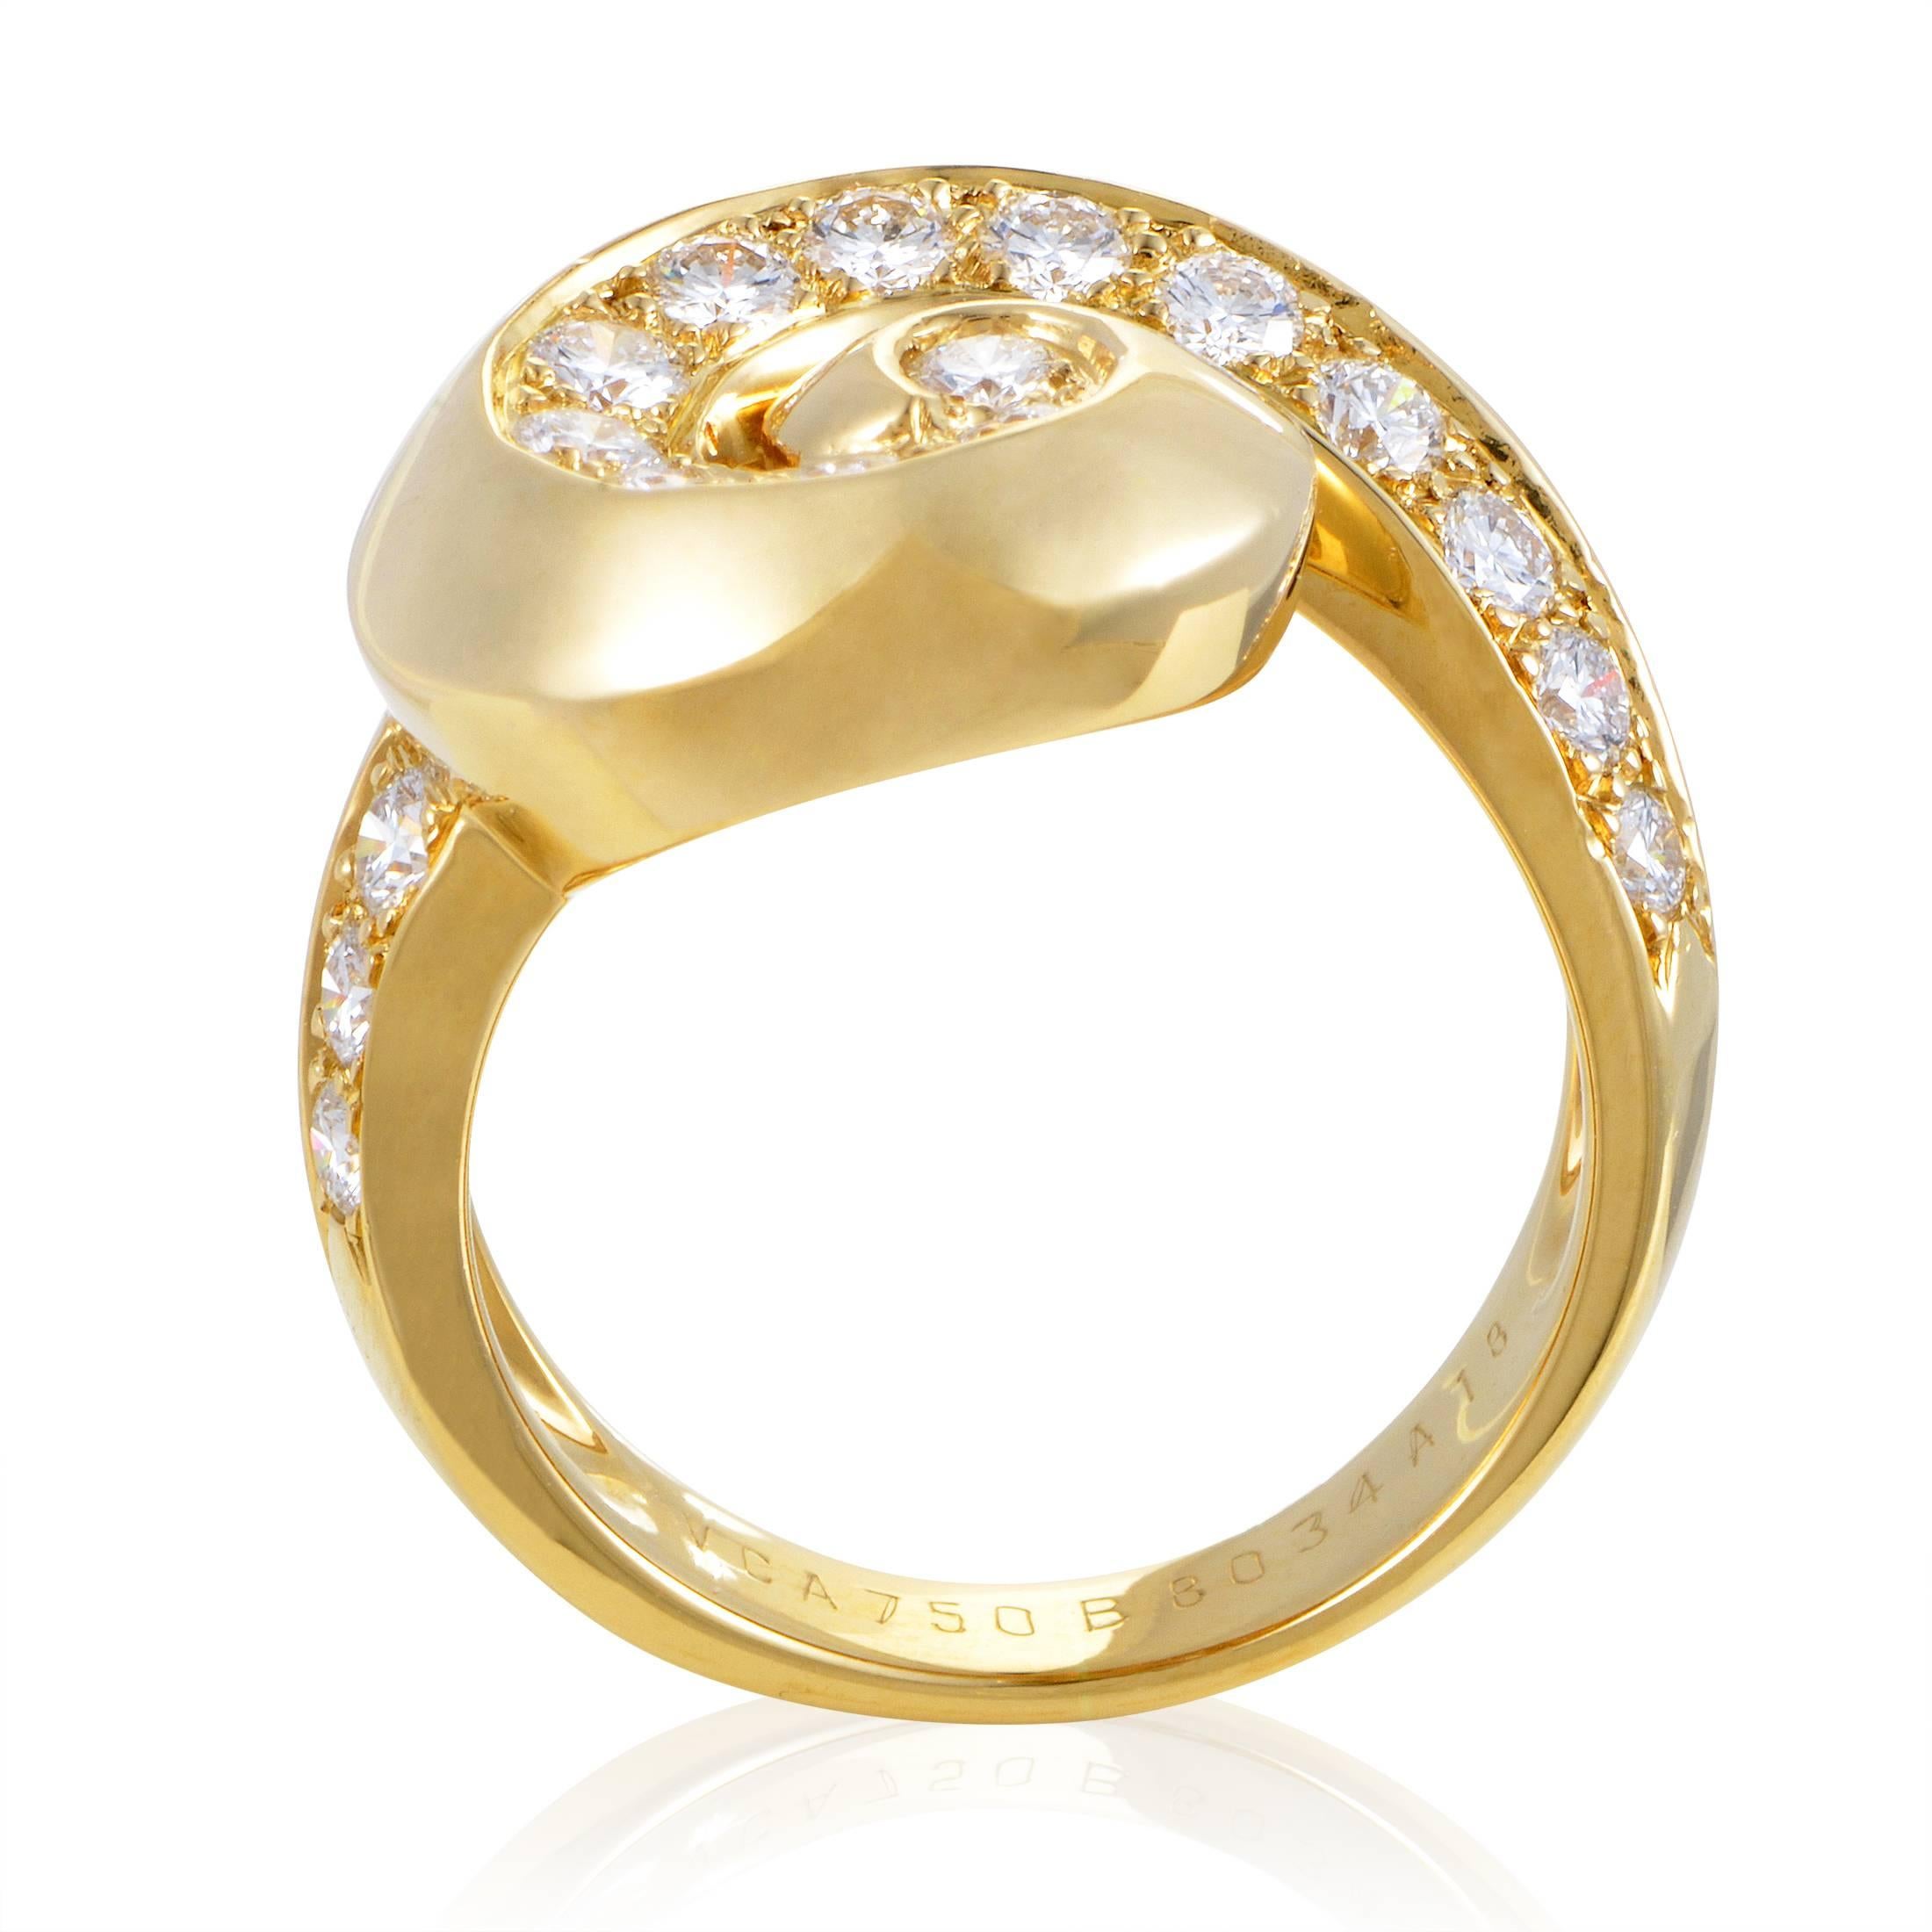 Flowing in gracefully smooth fashion and creating a wonderfully appealing shape in the process, the magnificent 18K yellow gold body of this spellbinding ring from Van Cleef & Arpels is polished to perfection and adorned with lustrous diamonds